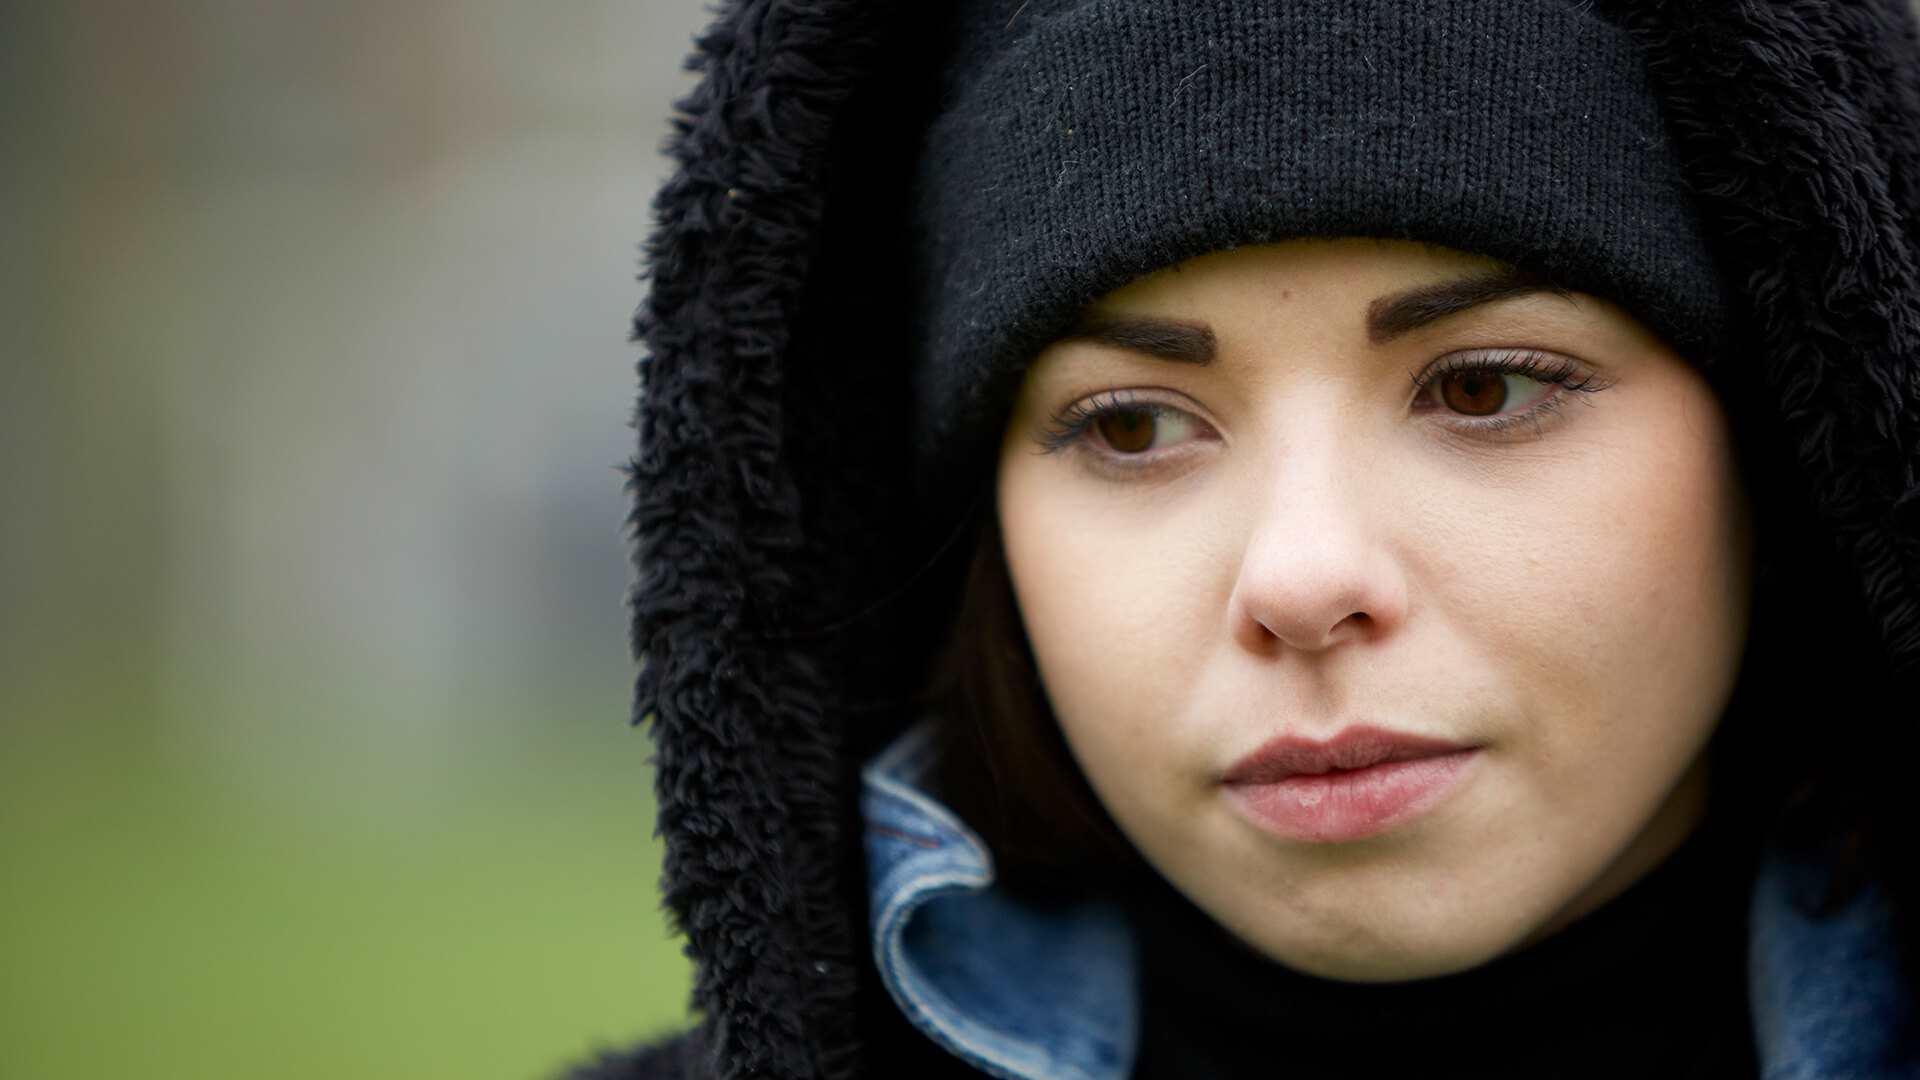 close-up-of-a-girl-wearing-black-beanie-looking-worried-with-eyes-looking-down